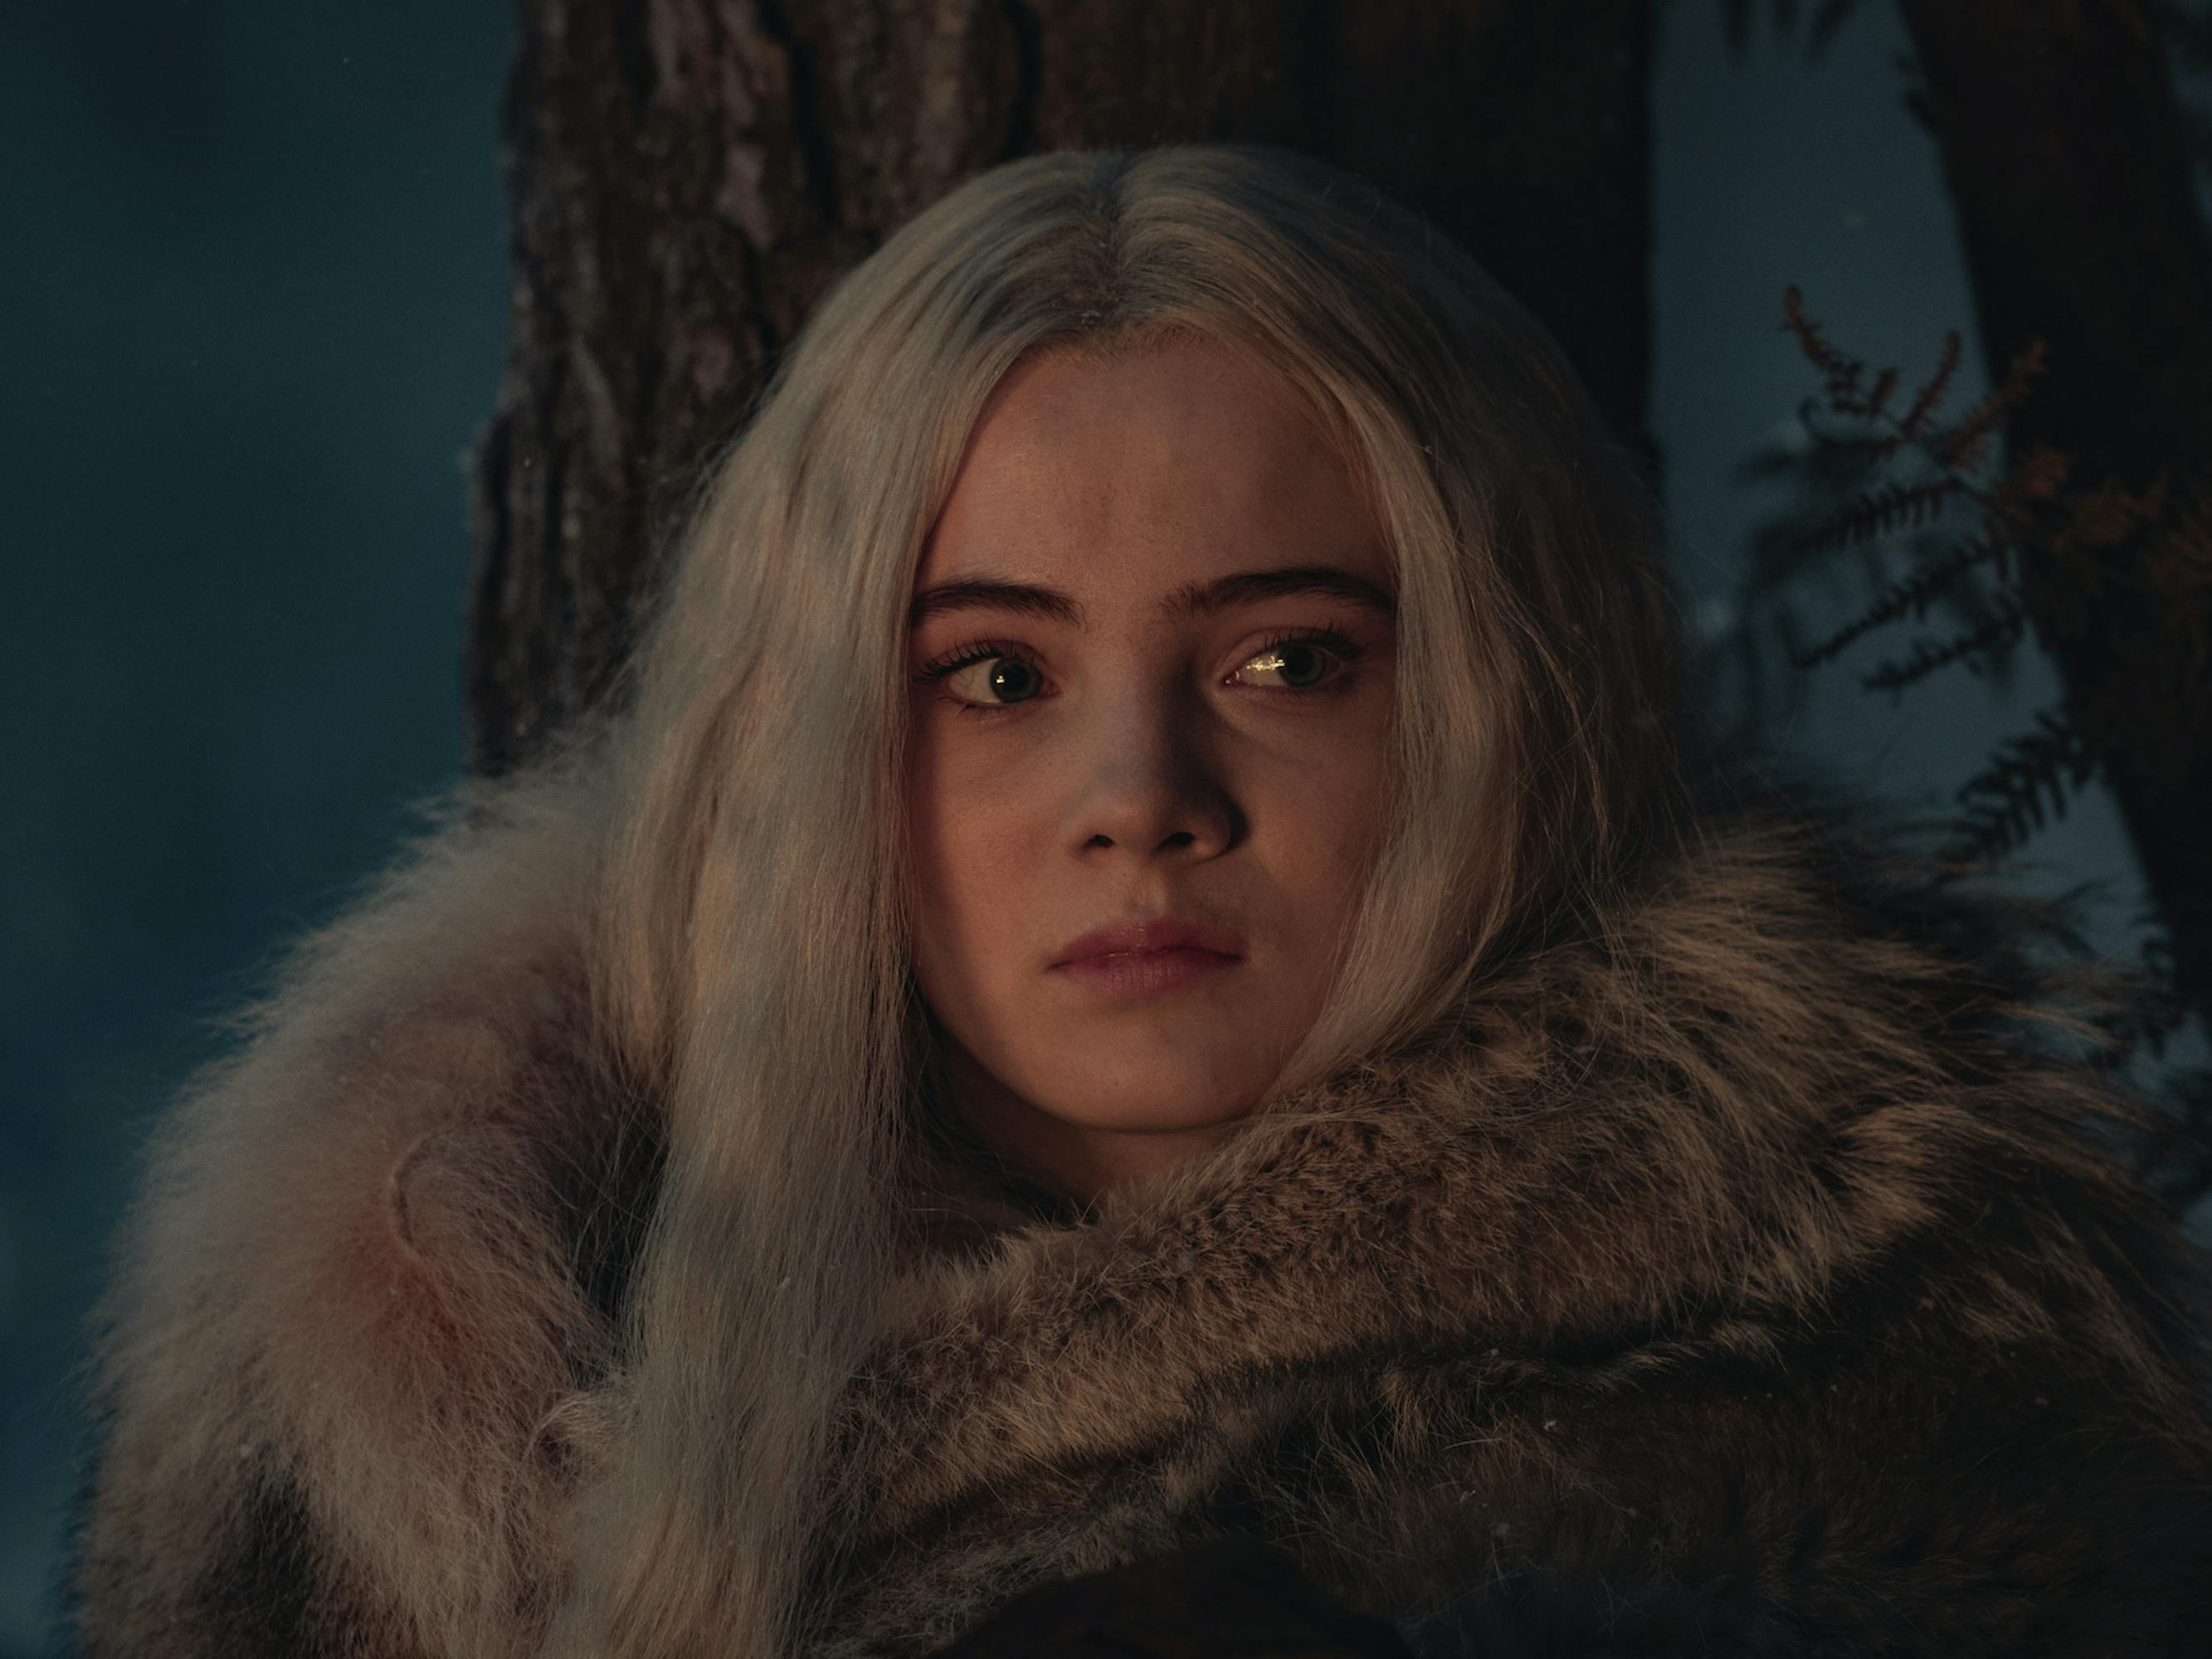 Freya Allen as Princess Ciri. She wears a fur jacket. Its nighttime and there are trees behind her. Her expression conveys concern